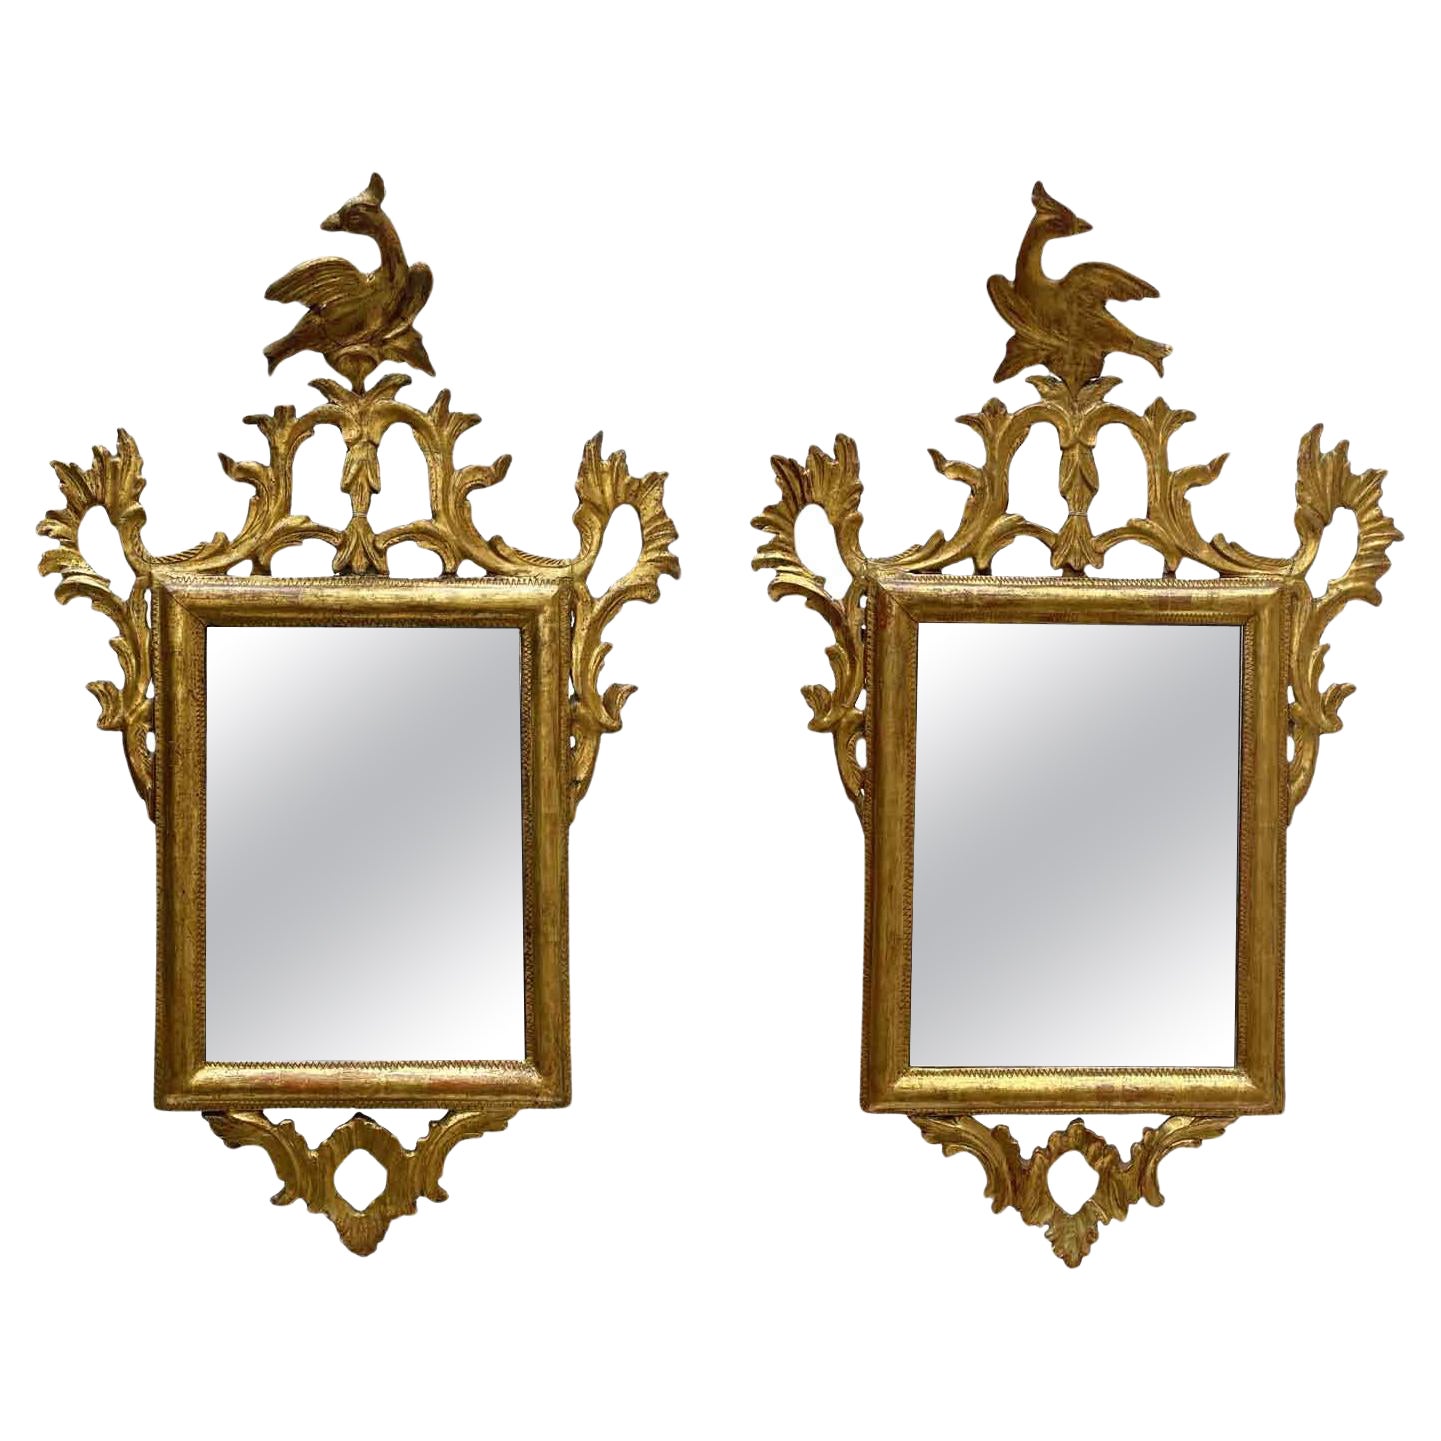 Pair of Italian Gilt Wood Carved Mirrors with Birds Early 1800s